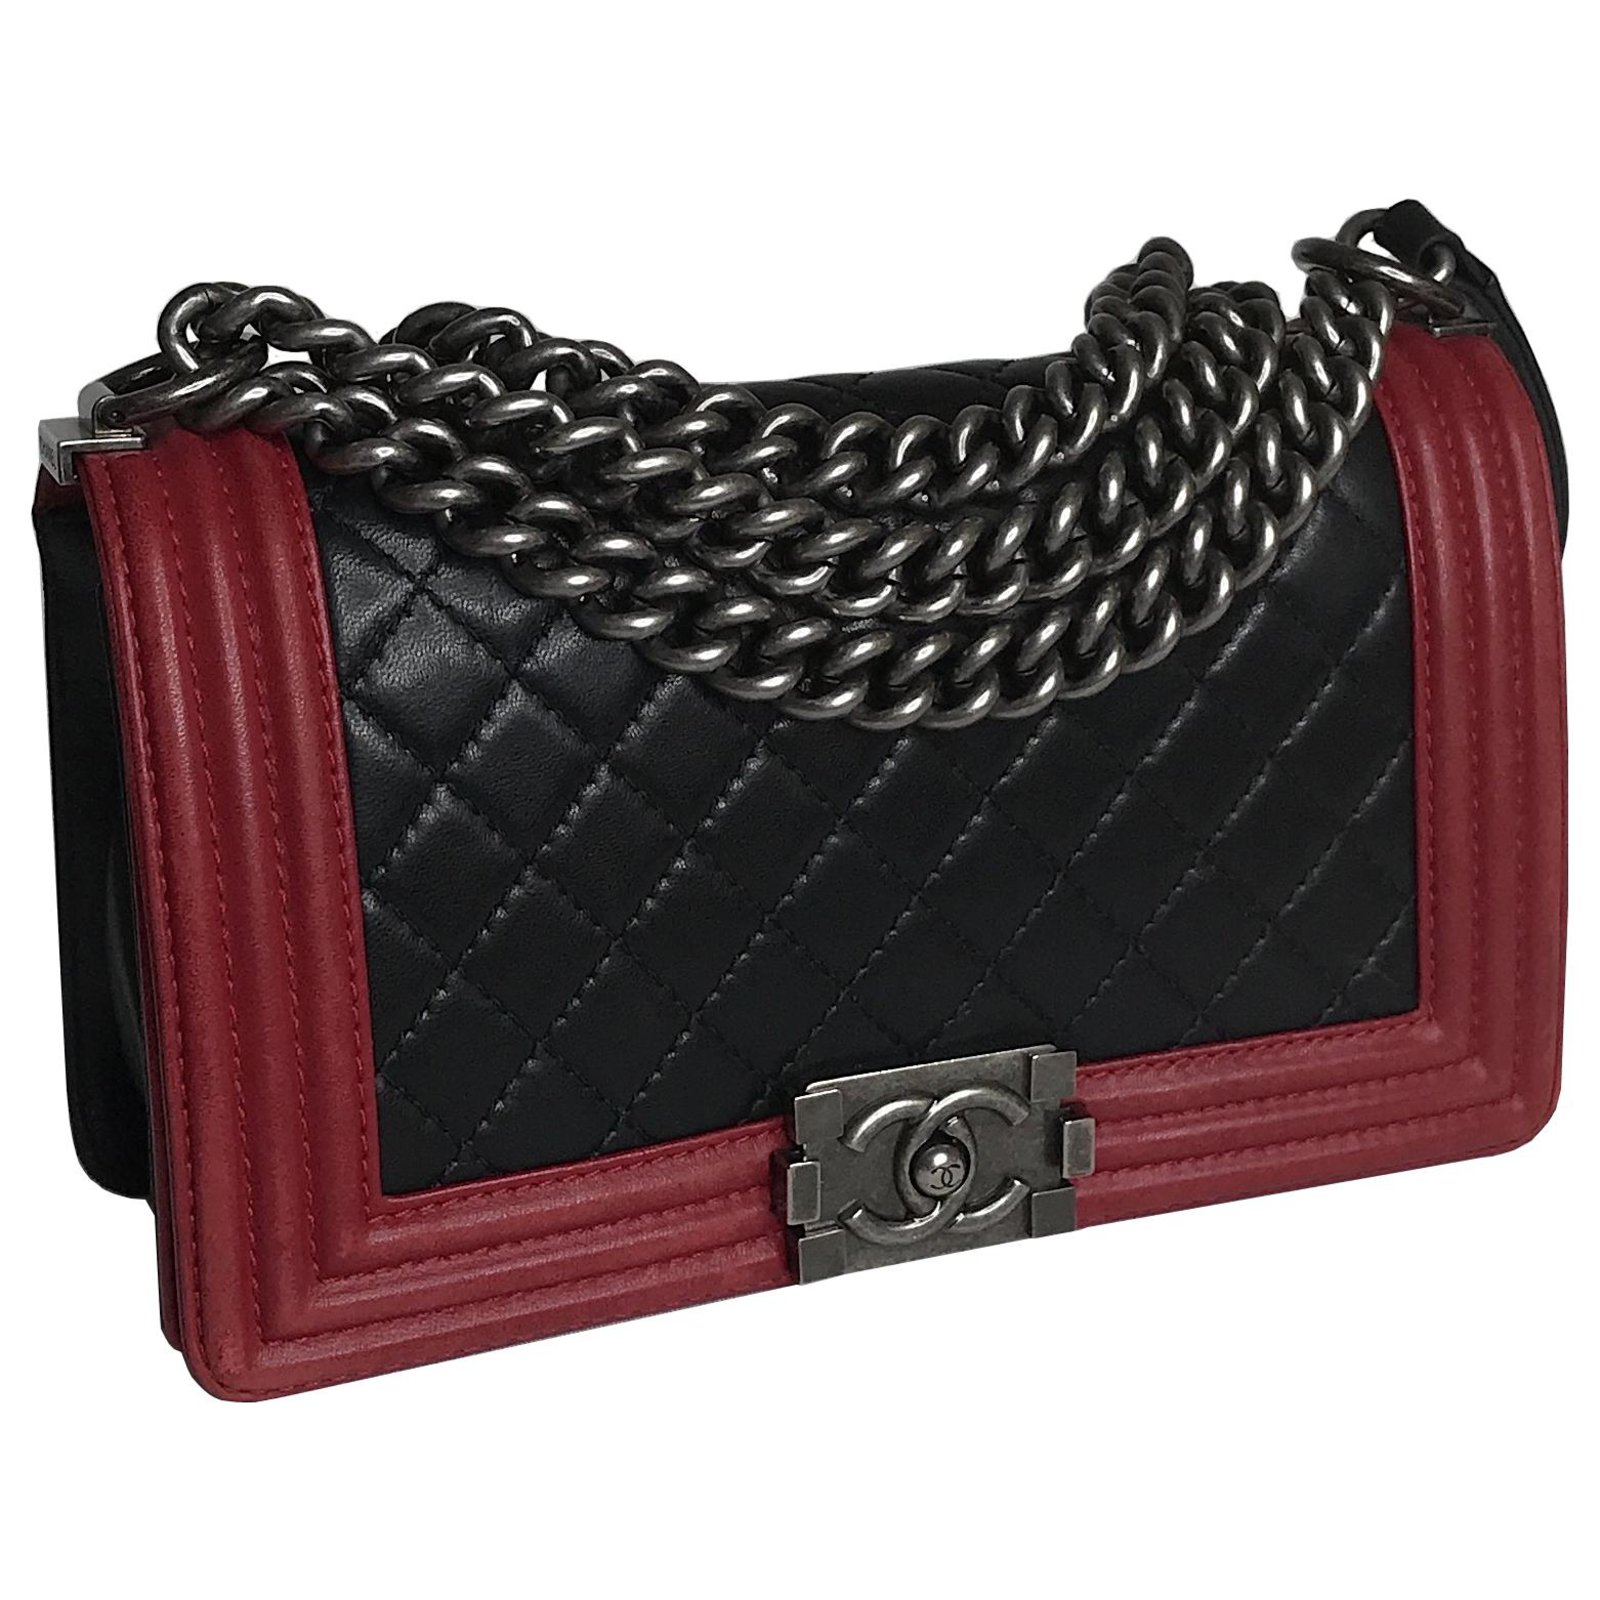 A Deeper Shade Of Red With These Chanel Bags - BAGAHOLICBOY